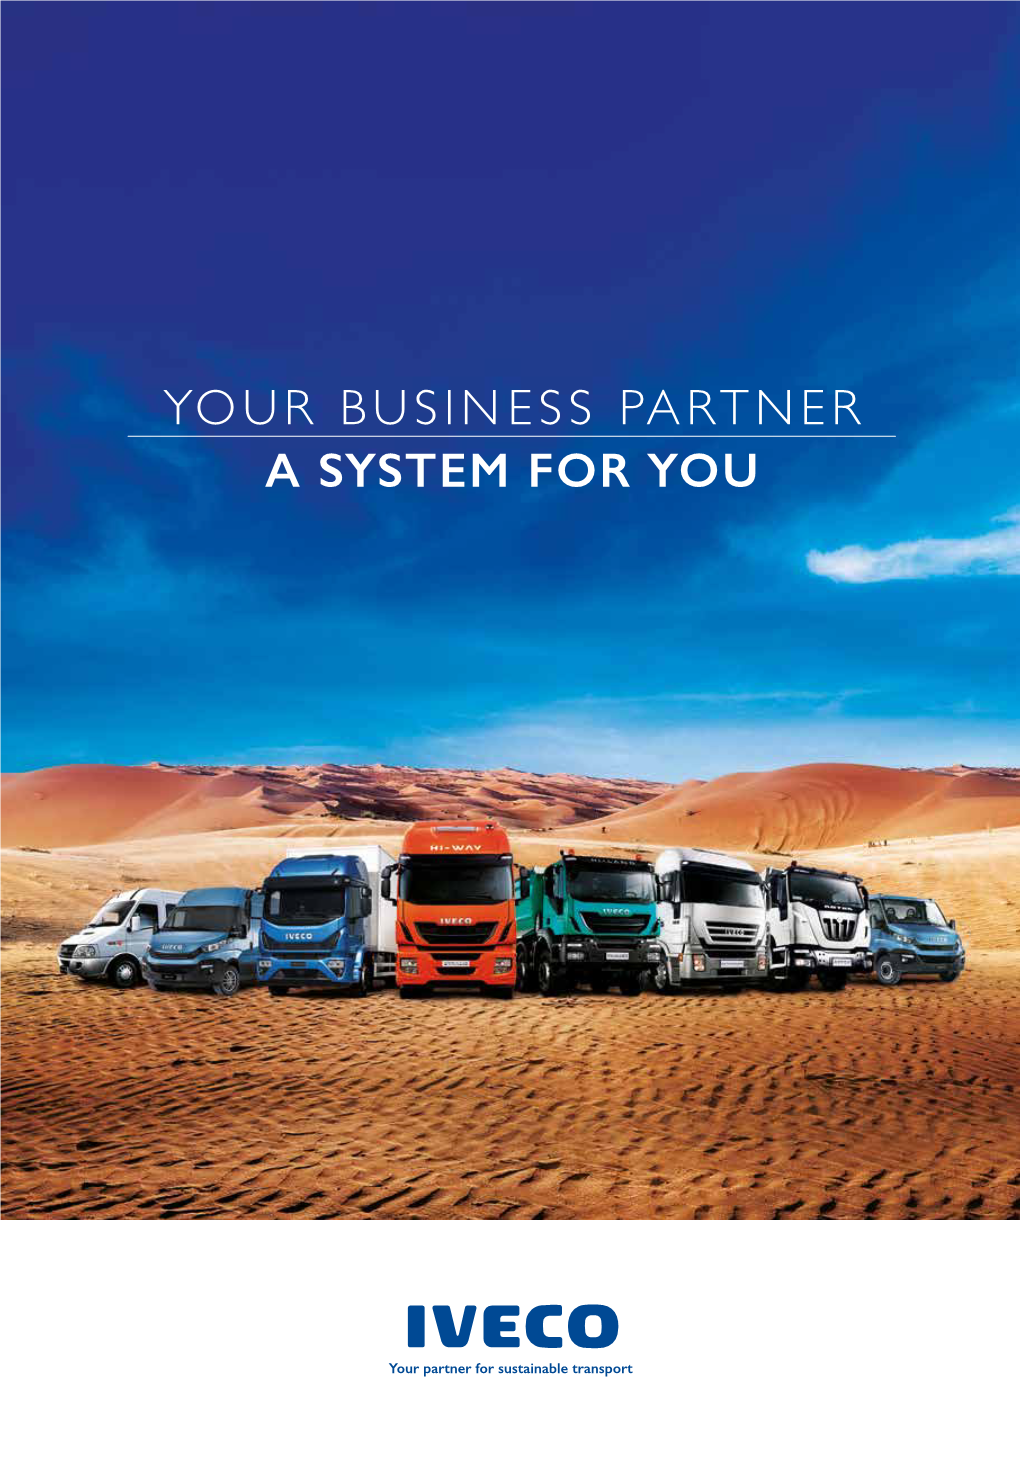 Your Business Partner a System for You